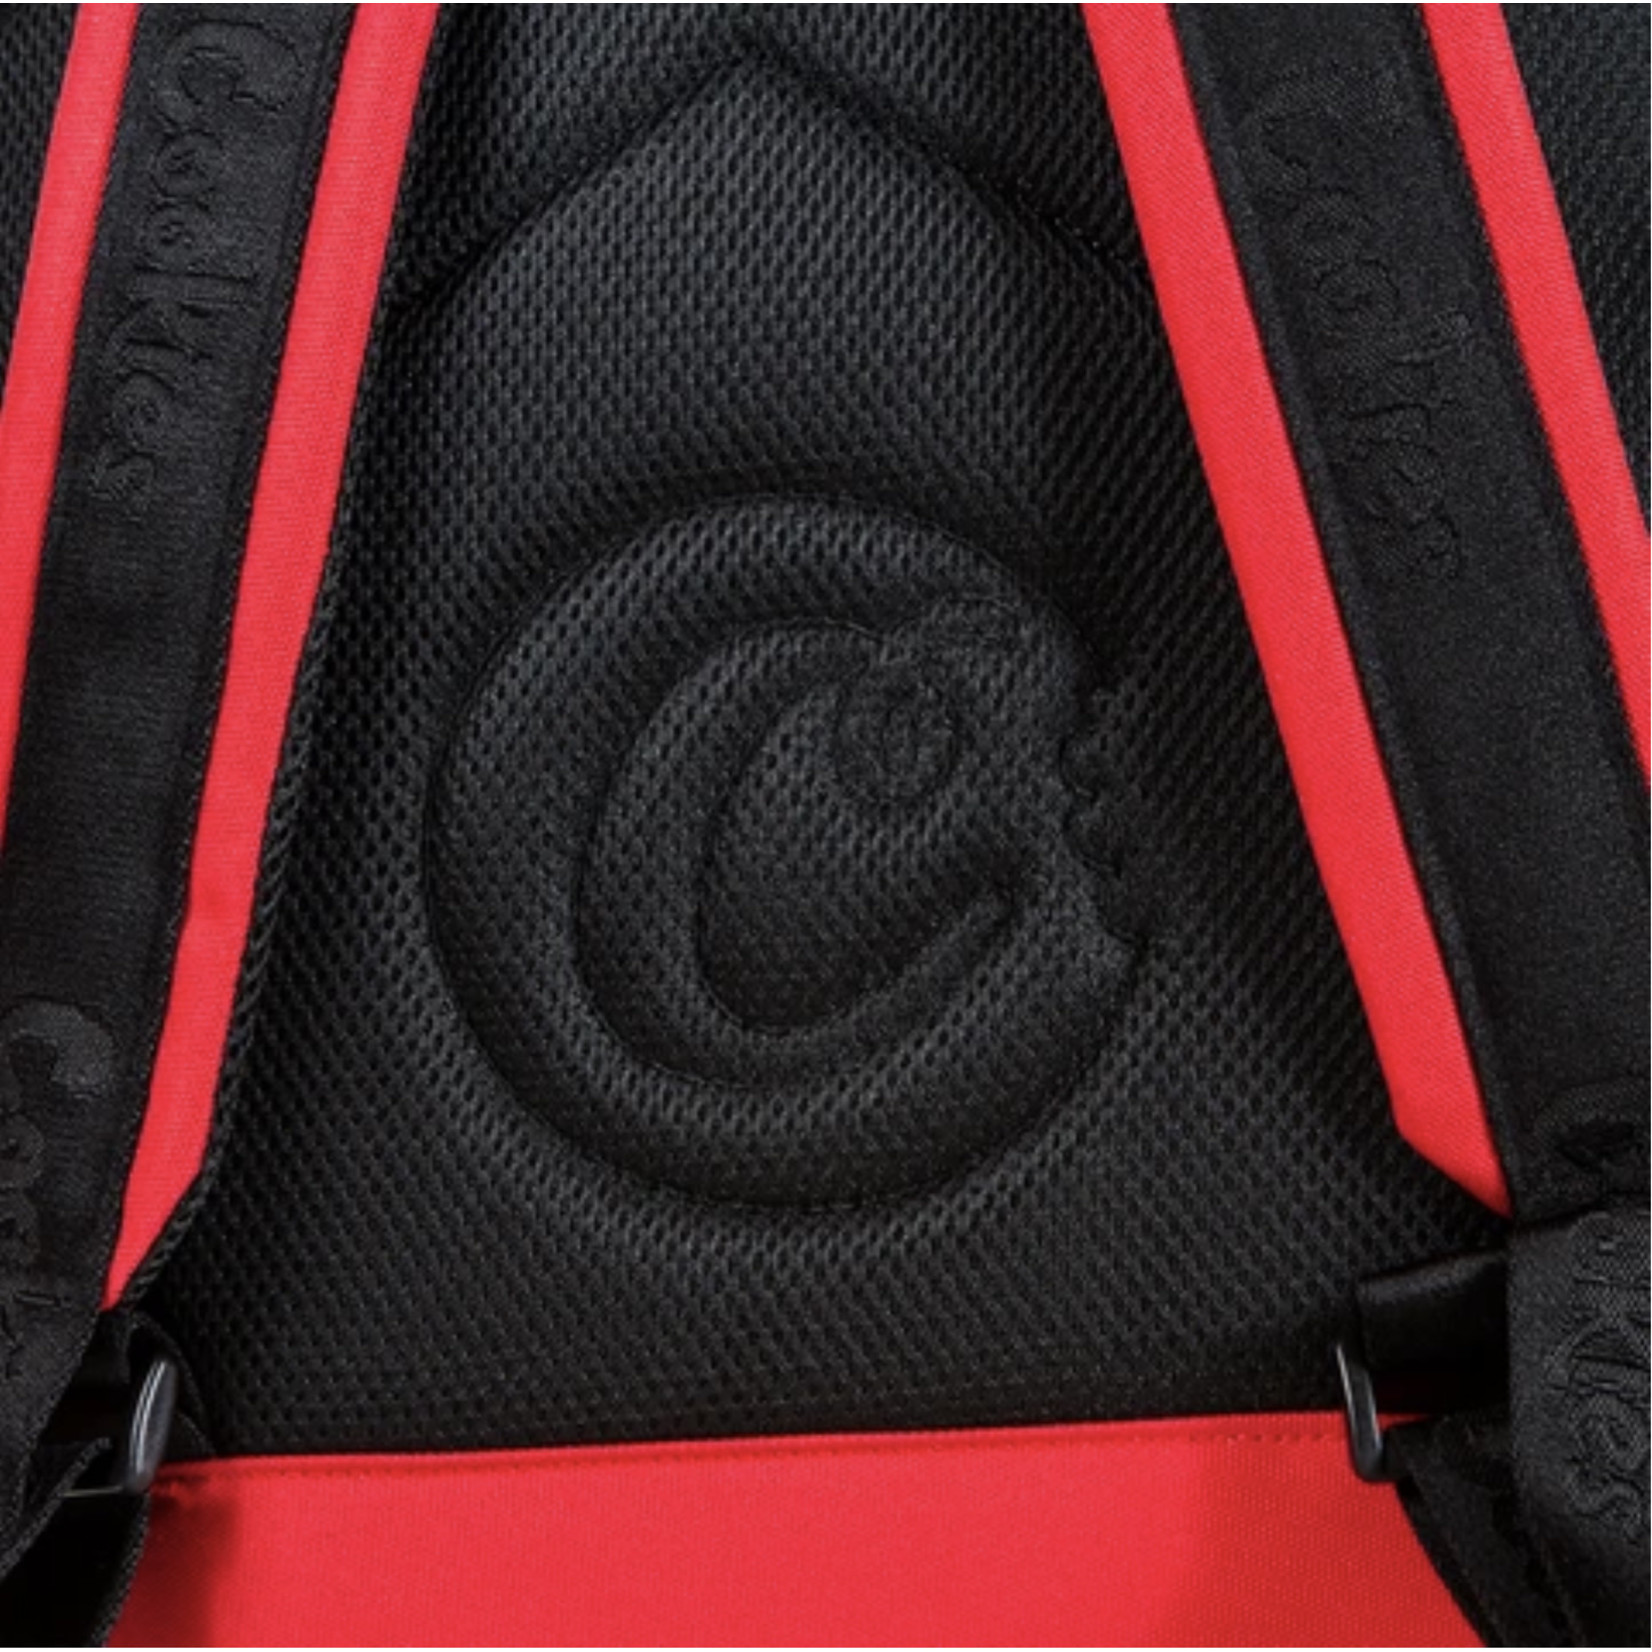 Cookies Cookies Orion Canvas Smell Proof Backpack